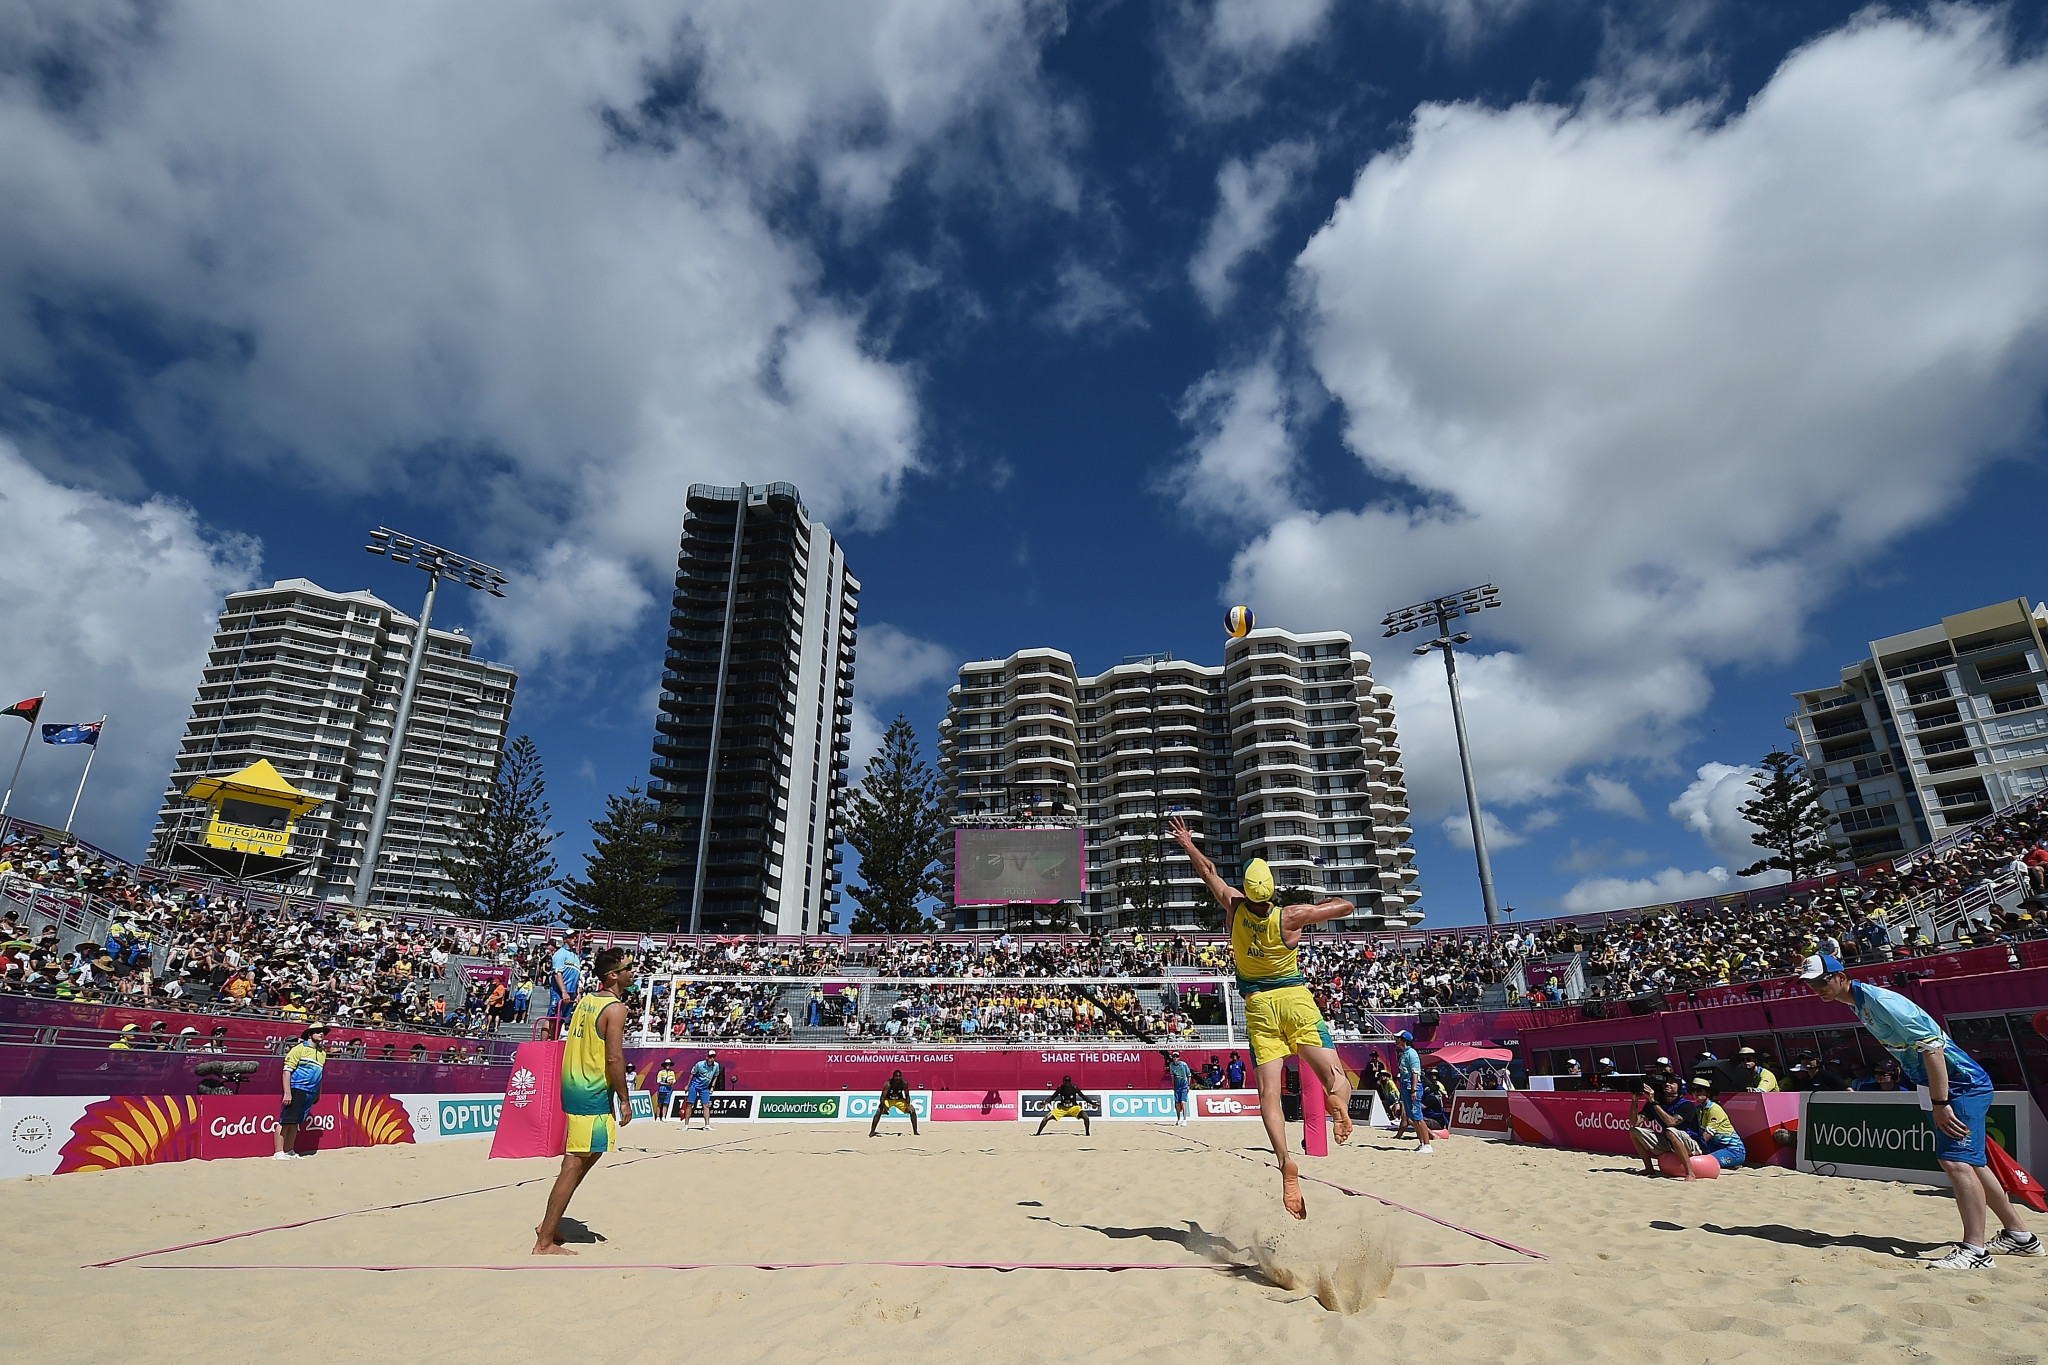 Beach volleyball has made its debut at the Commonwealth Games in Gold Coast 2018 ©Getty Images